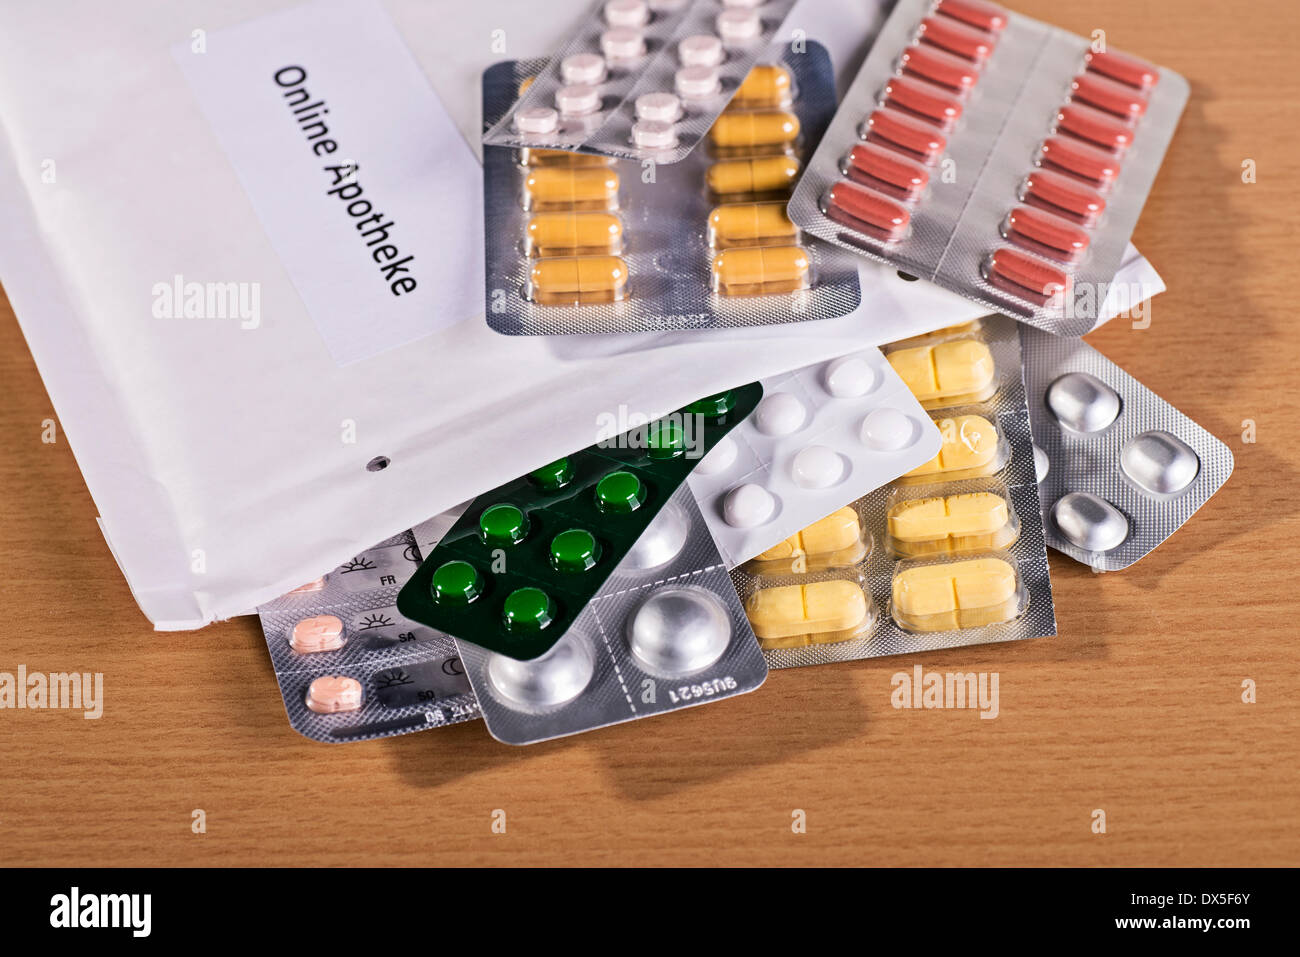 Open envelope marked 'Online Apotheke' as a symbol for the purchase of medicines in a mail-order pharmacy. Stock Photo